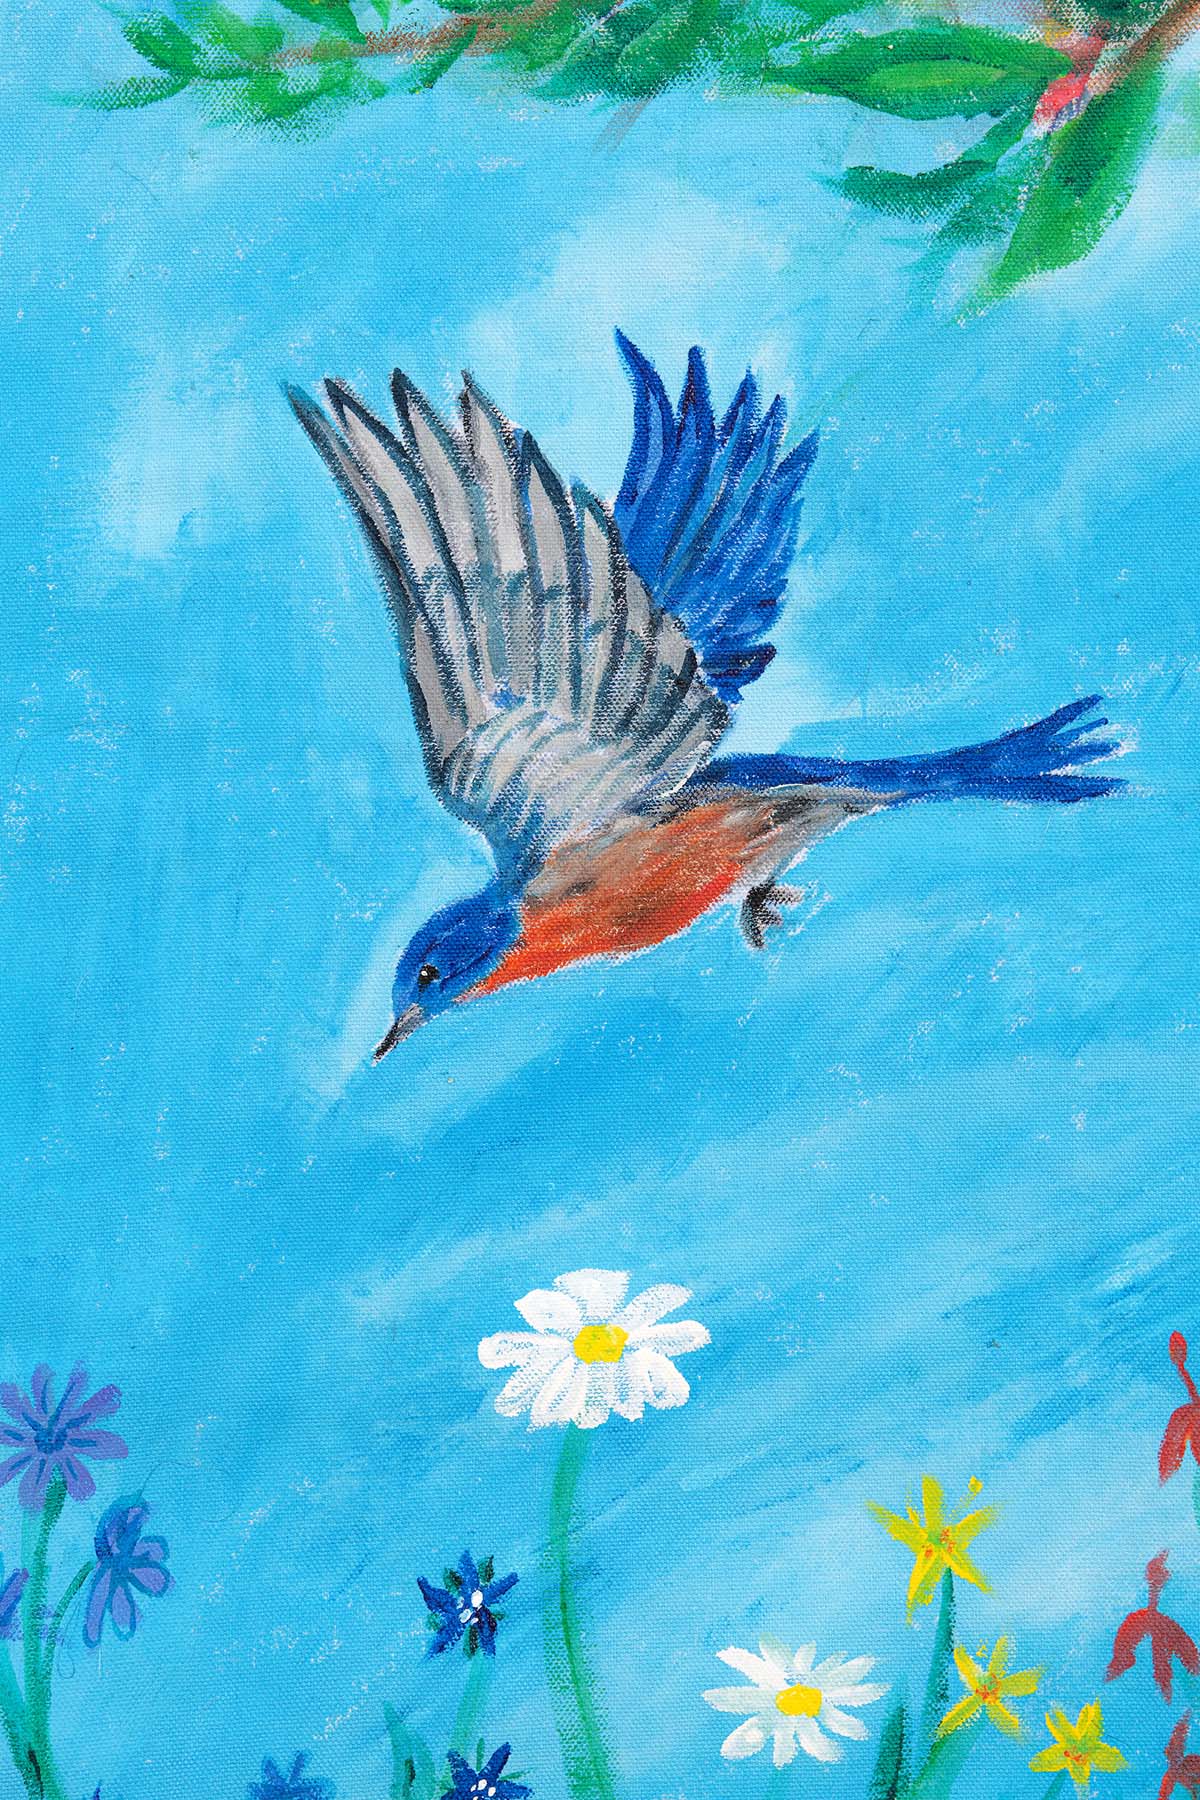 A close-up photograph of a painted blue bird diving toward some flowers against a blue sky